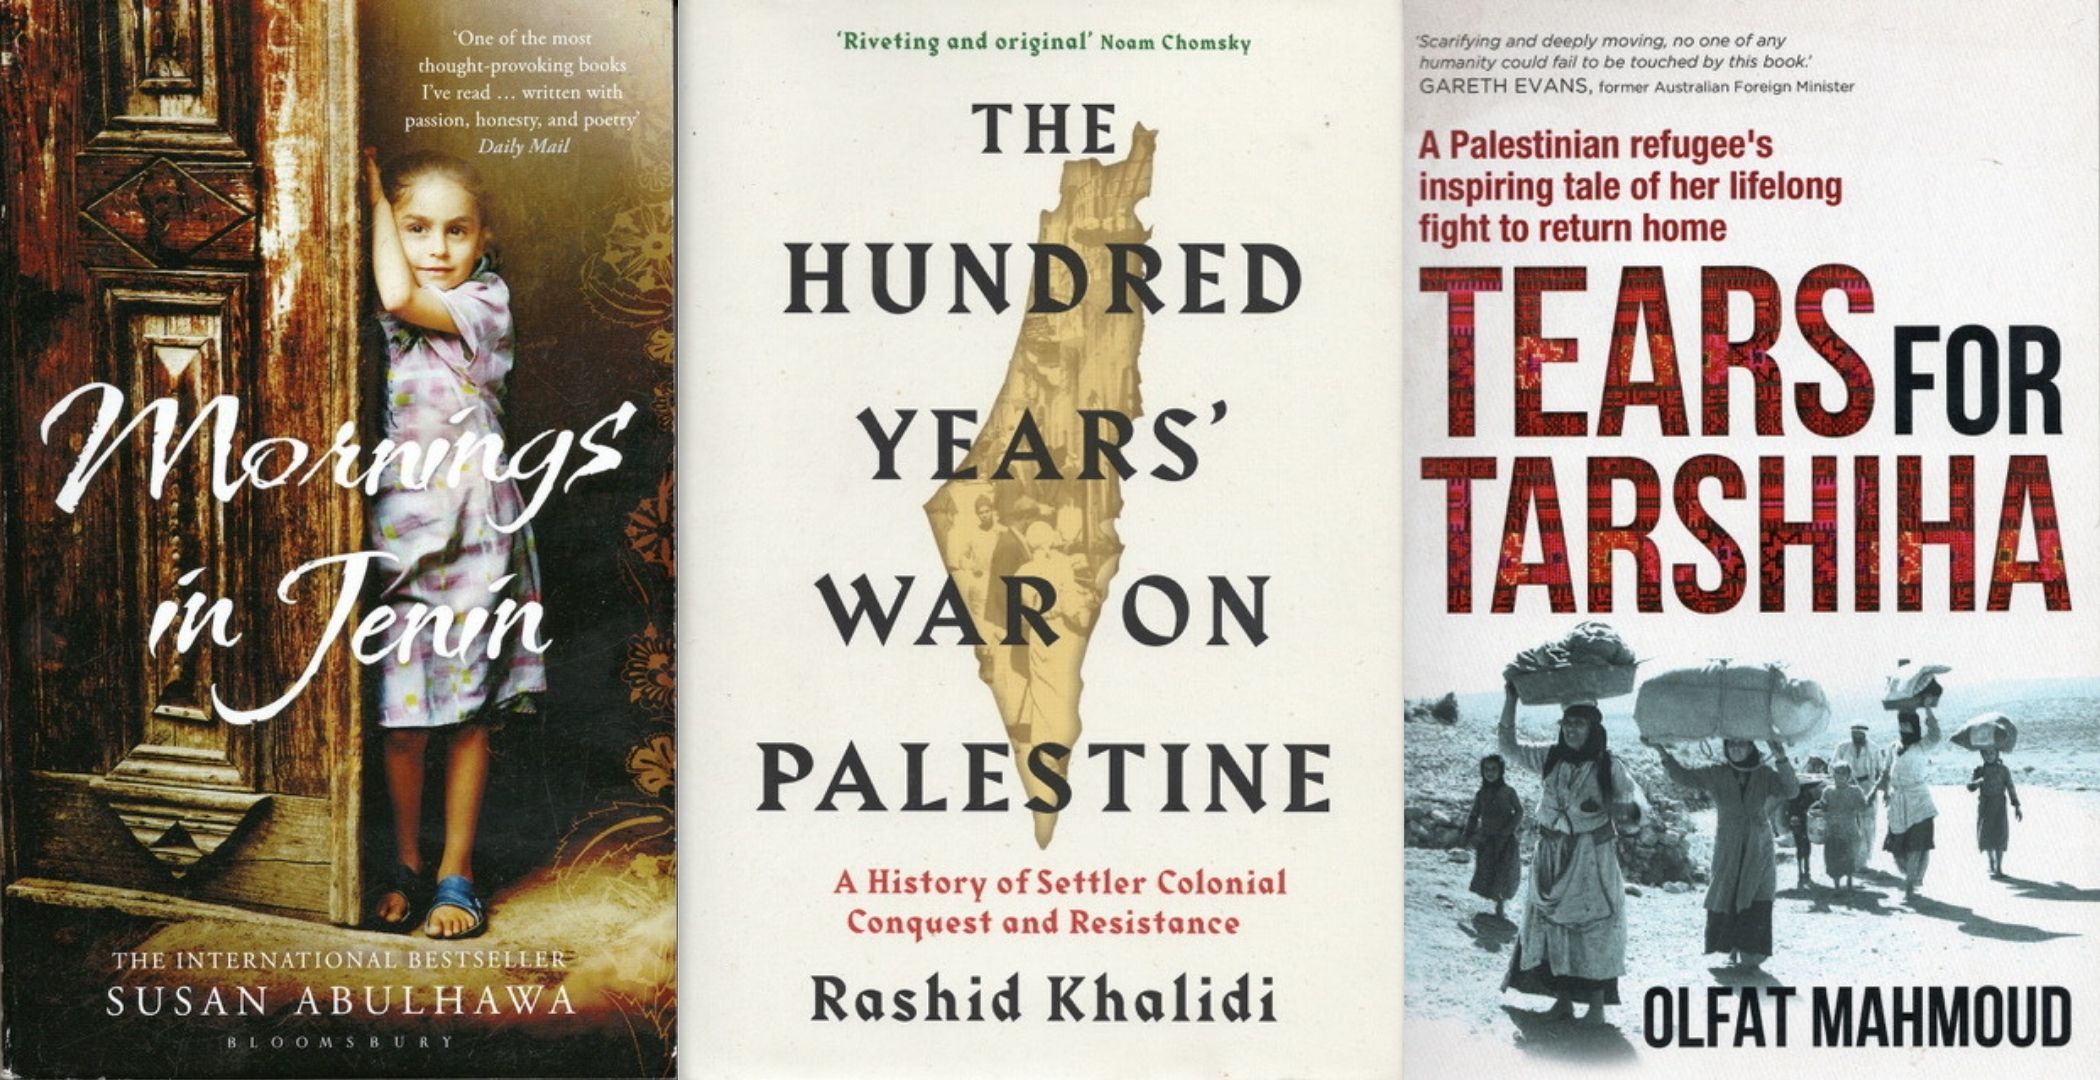 Three book covers:: Morninngs in Jenin; The hundred year war on Palestine; Tears for Tarshiha